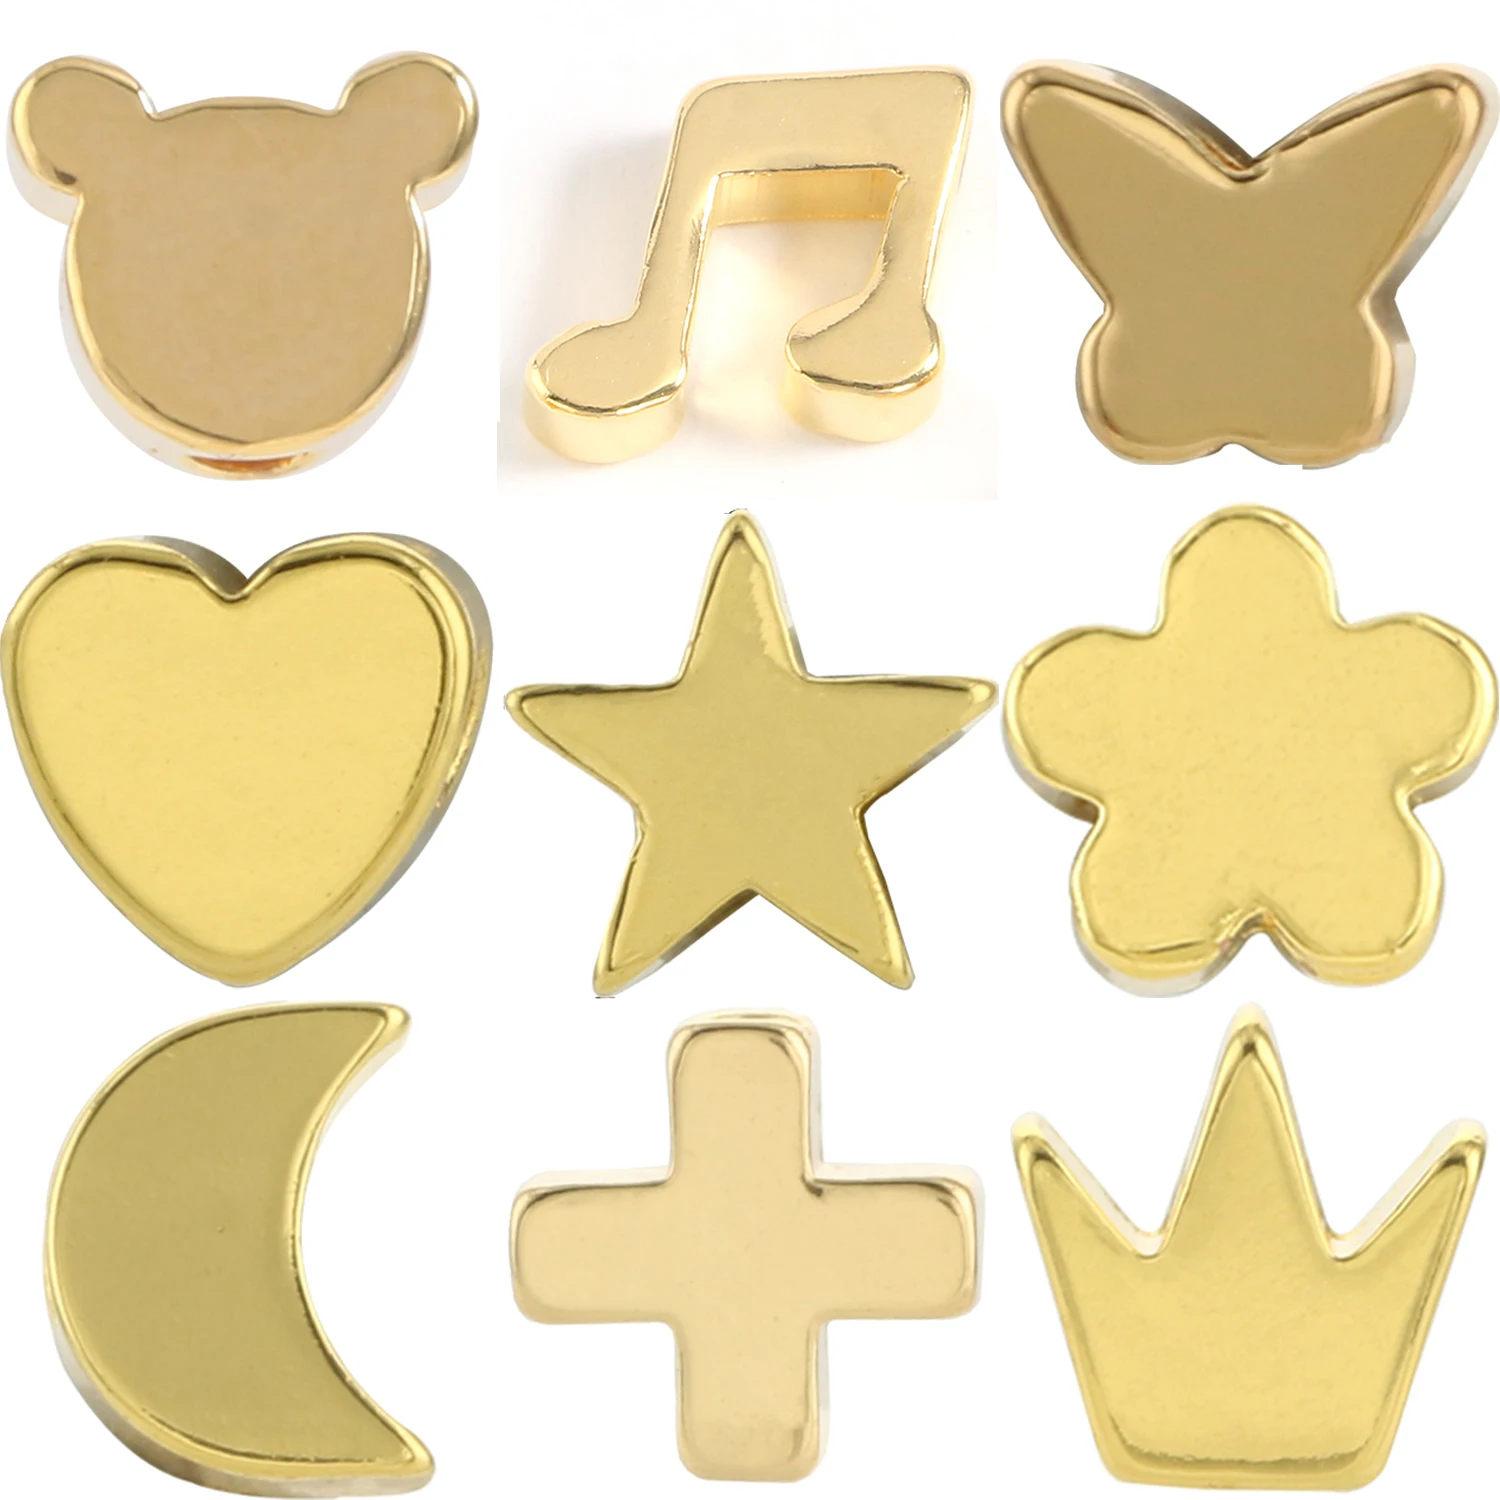 

10pcs/lot Heart Cross Star Crown Moon Mickey Shape Copper Spacer Bead Loose Metal Charms Beads for Jewelry Making DIY Bracelet